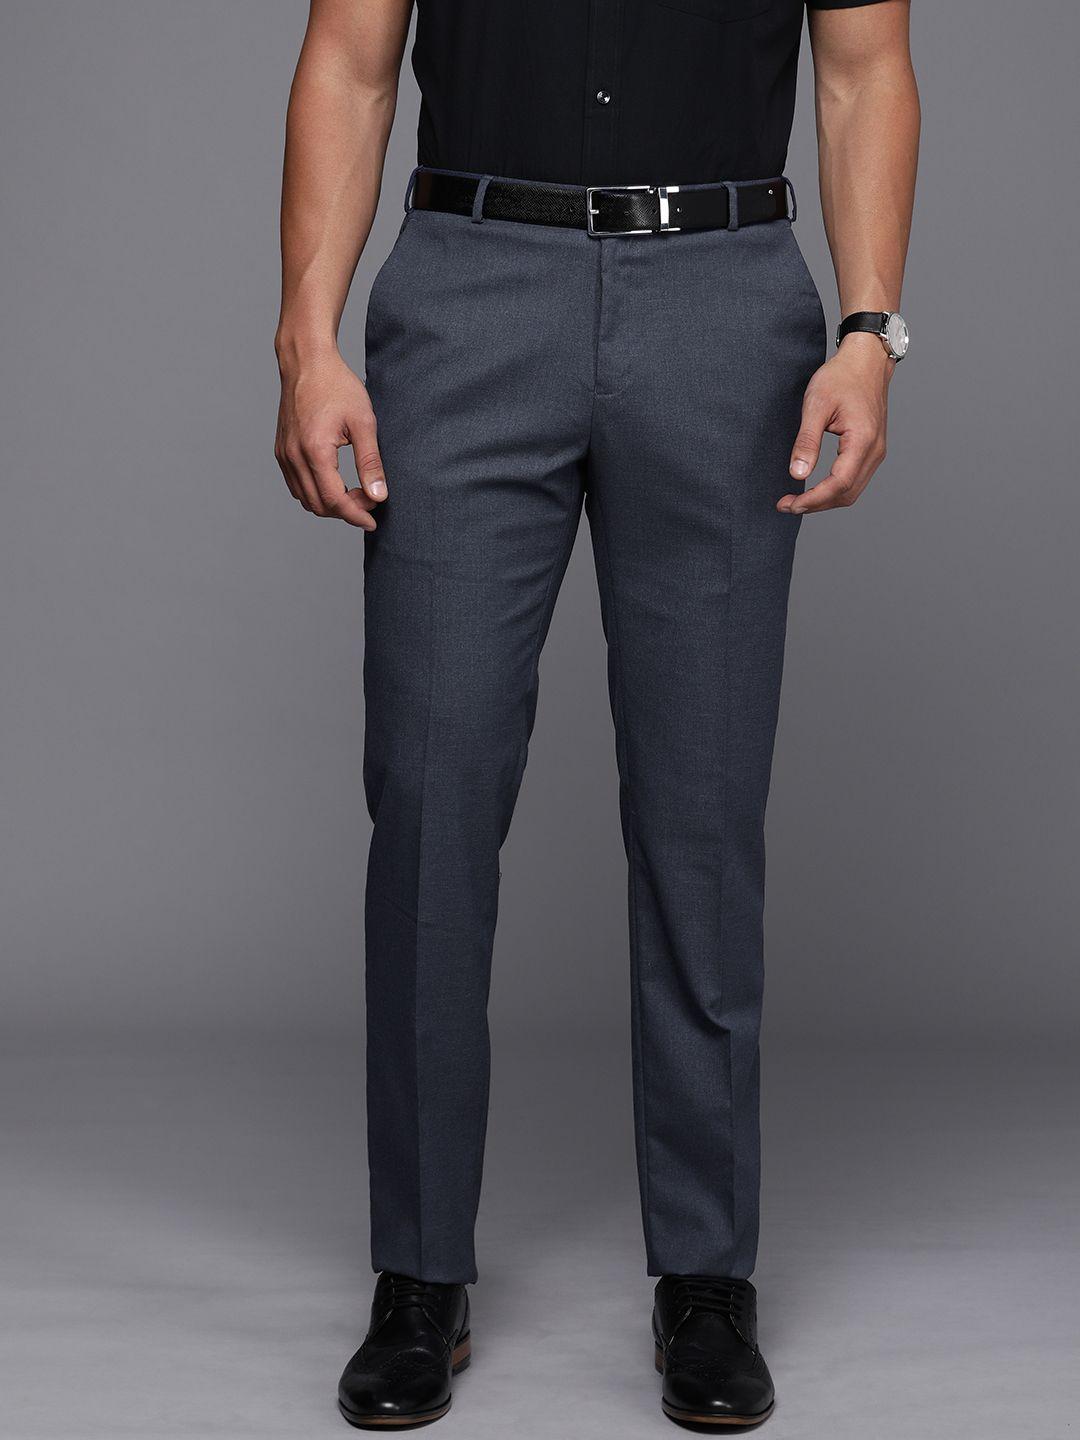 raymond-men-textured-slim-fit-mid-rise-formal-trousers